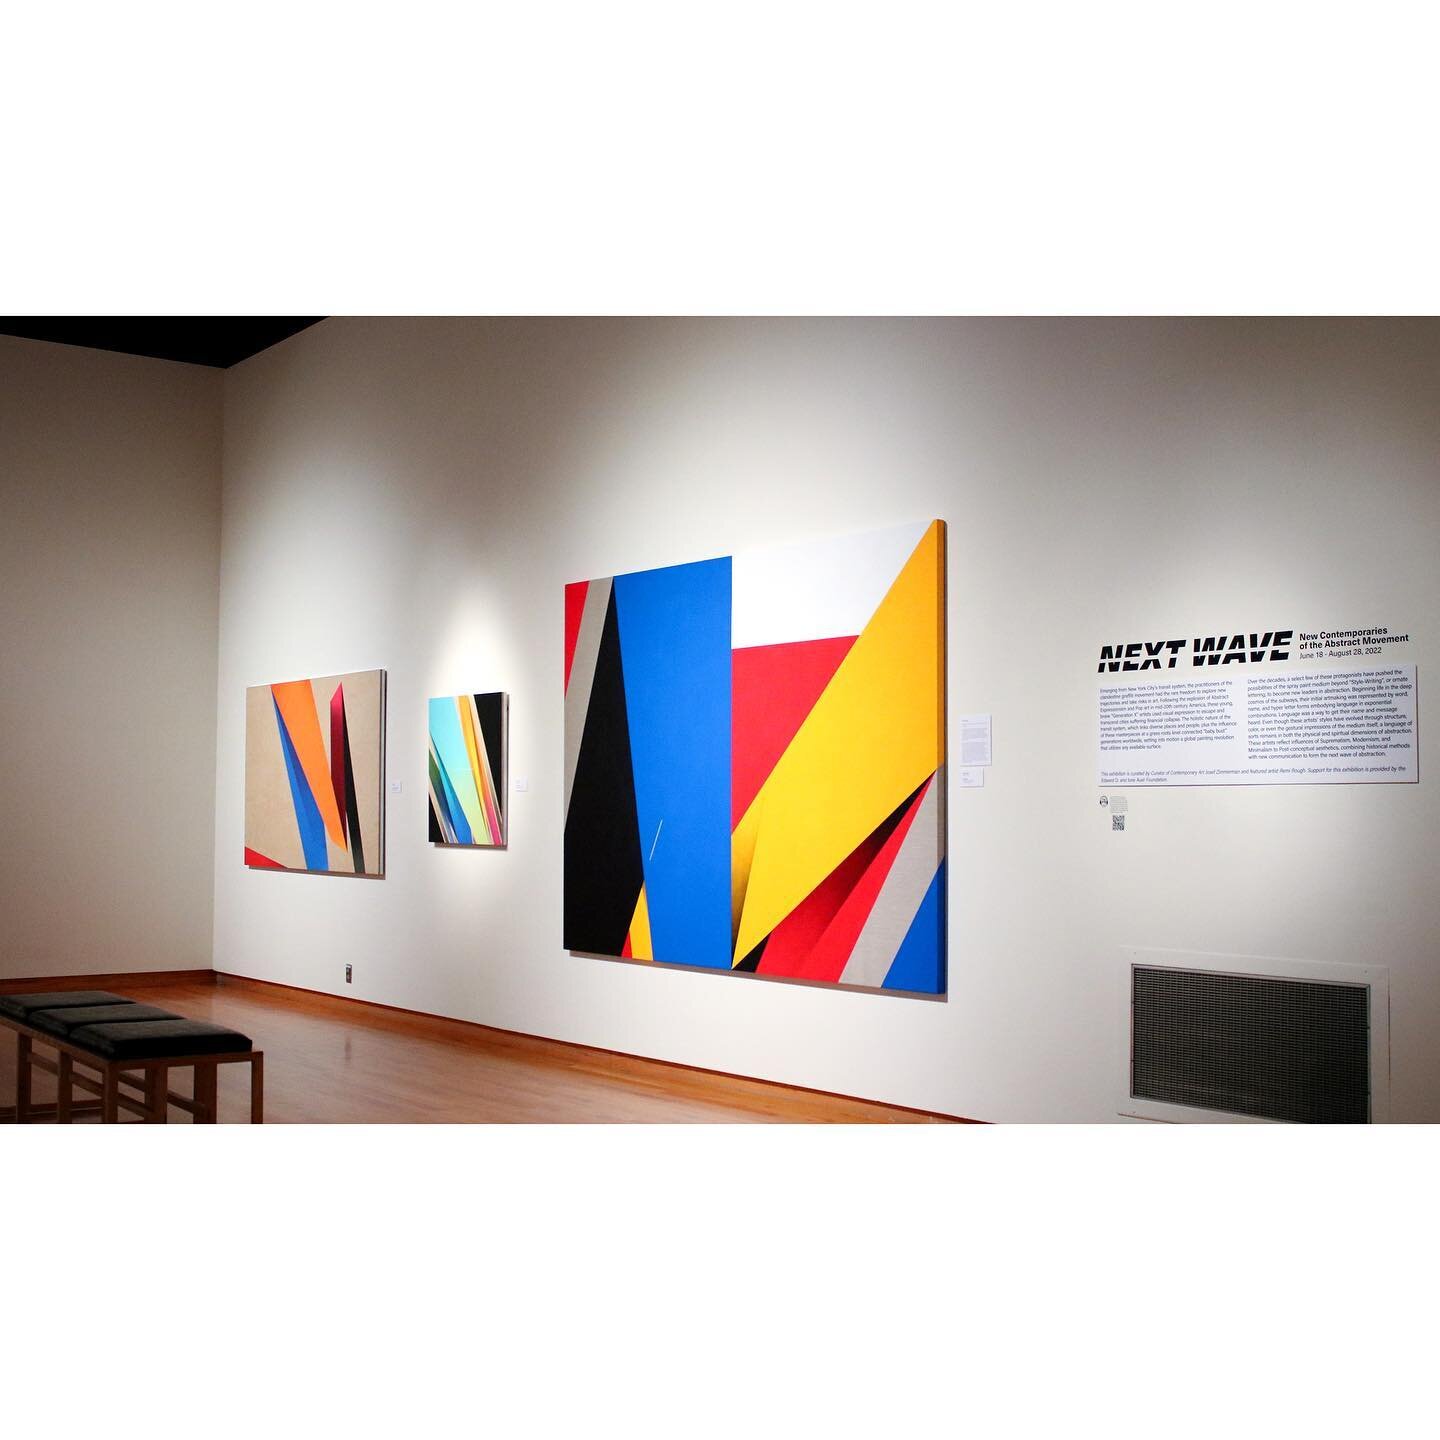 @remirough on show at @fwmoa as part of Next Wave: New contemporaries of the abstract movement.
On until August 28.